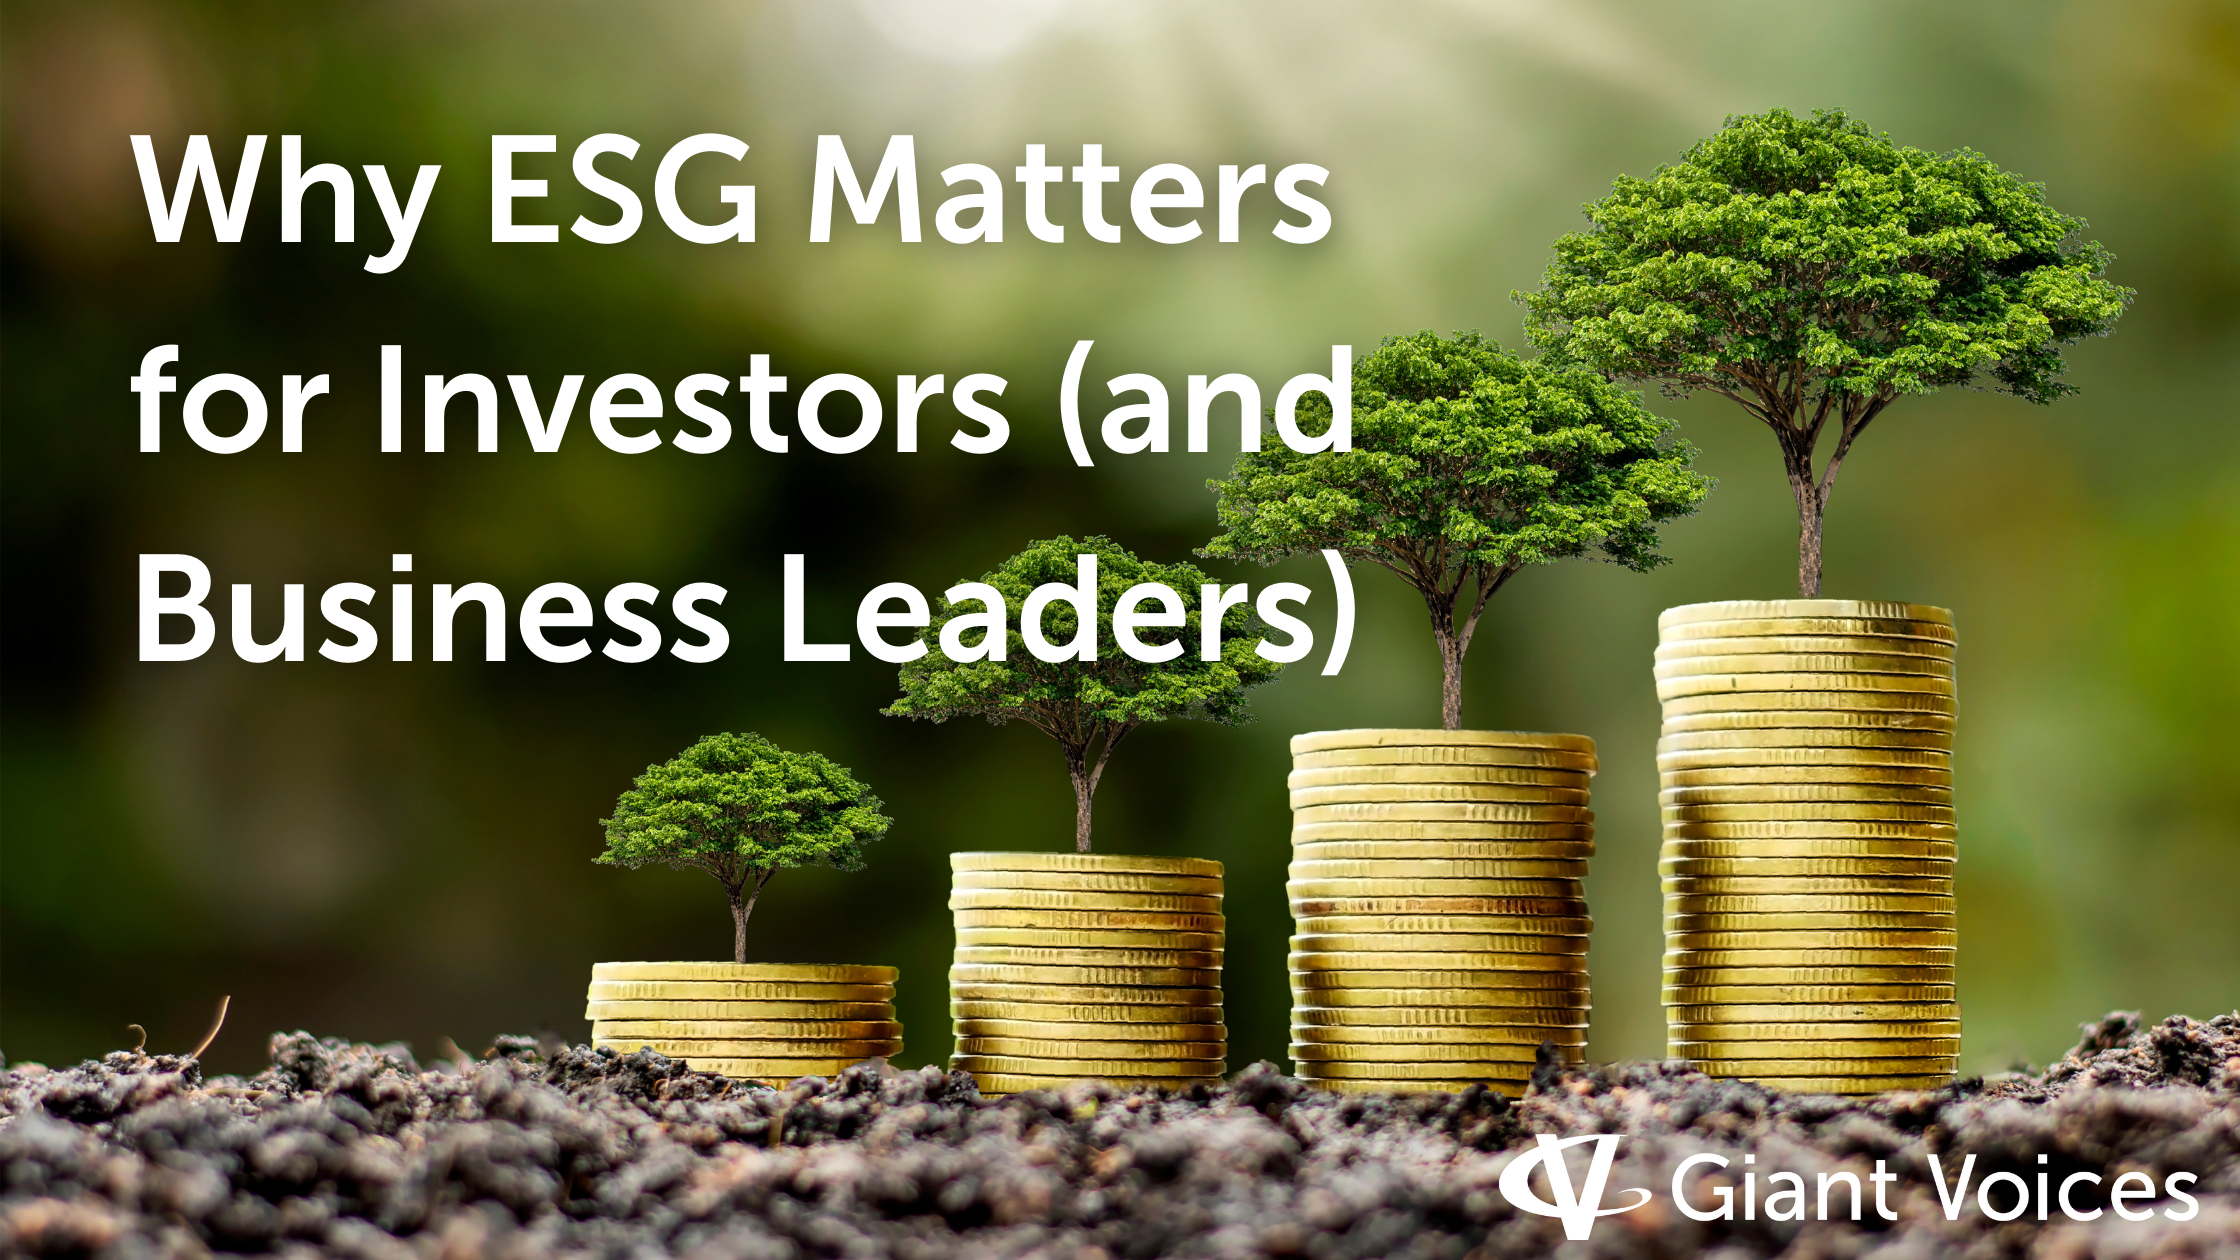 Why ESG Matters for Investors (and Business Leaders) | Giant Voices Blog